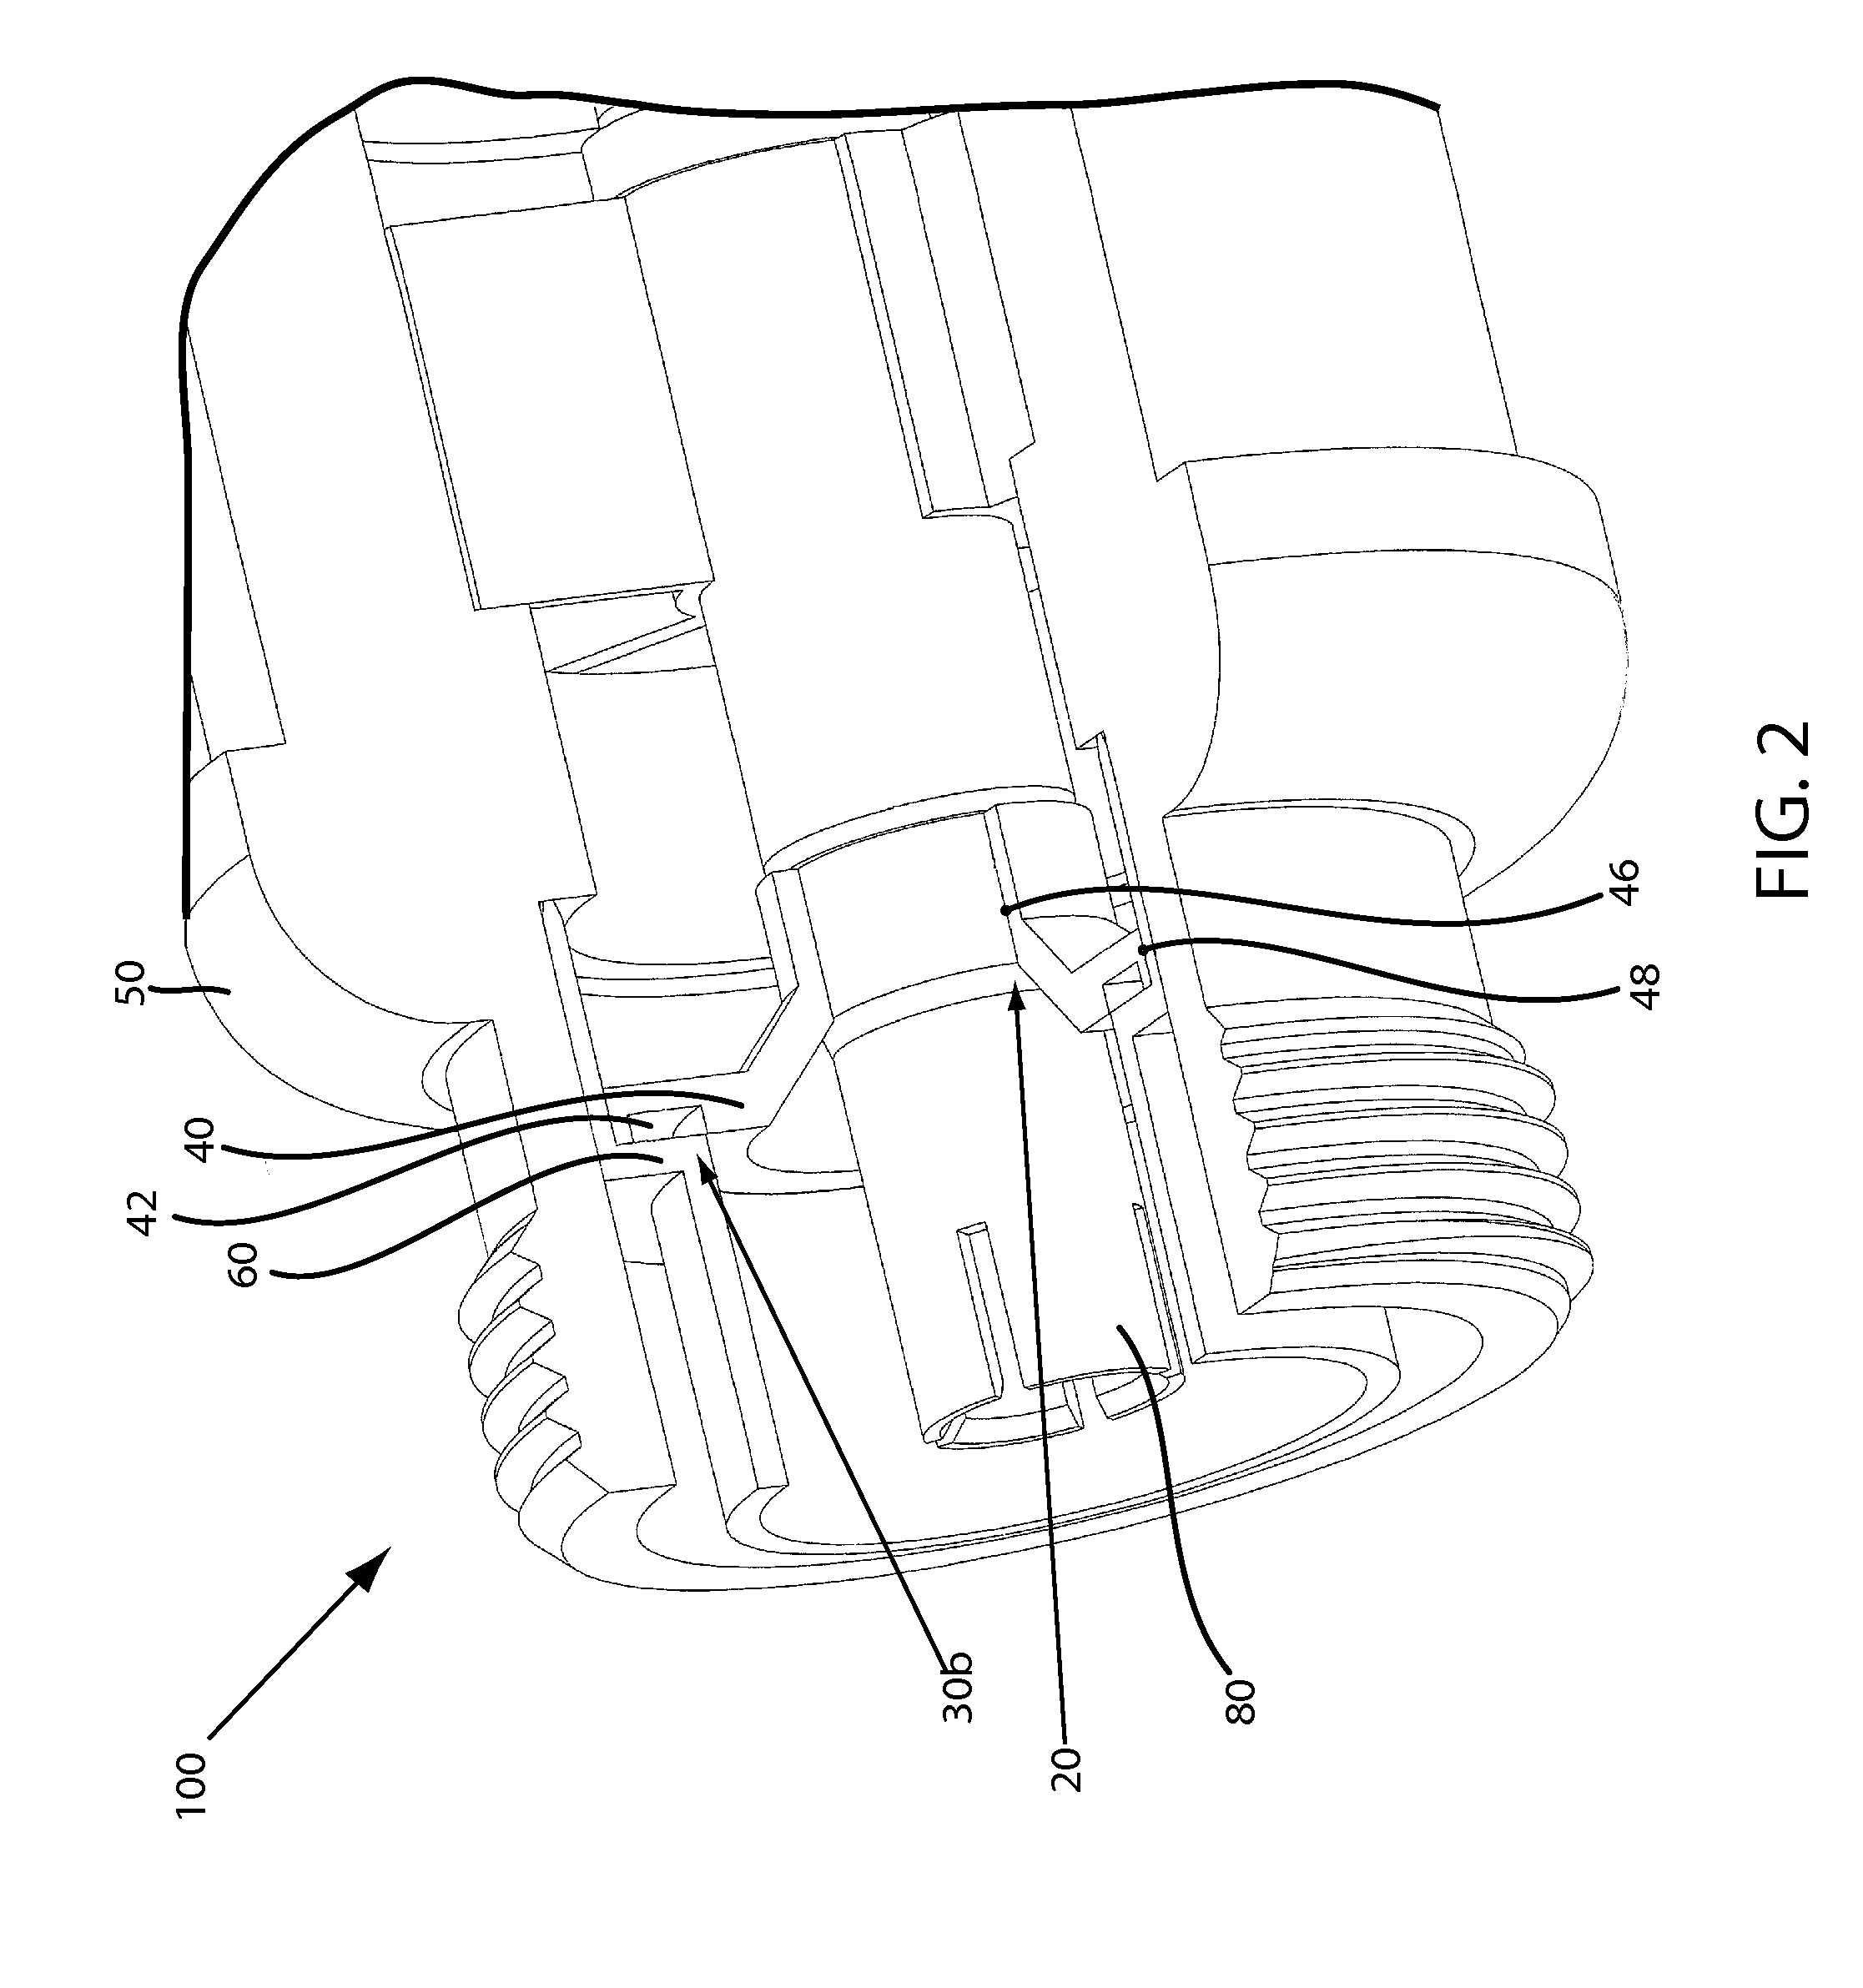 Internal coaxial cable connector integrated circuit and method of use thereof